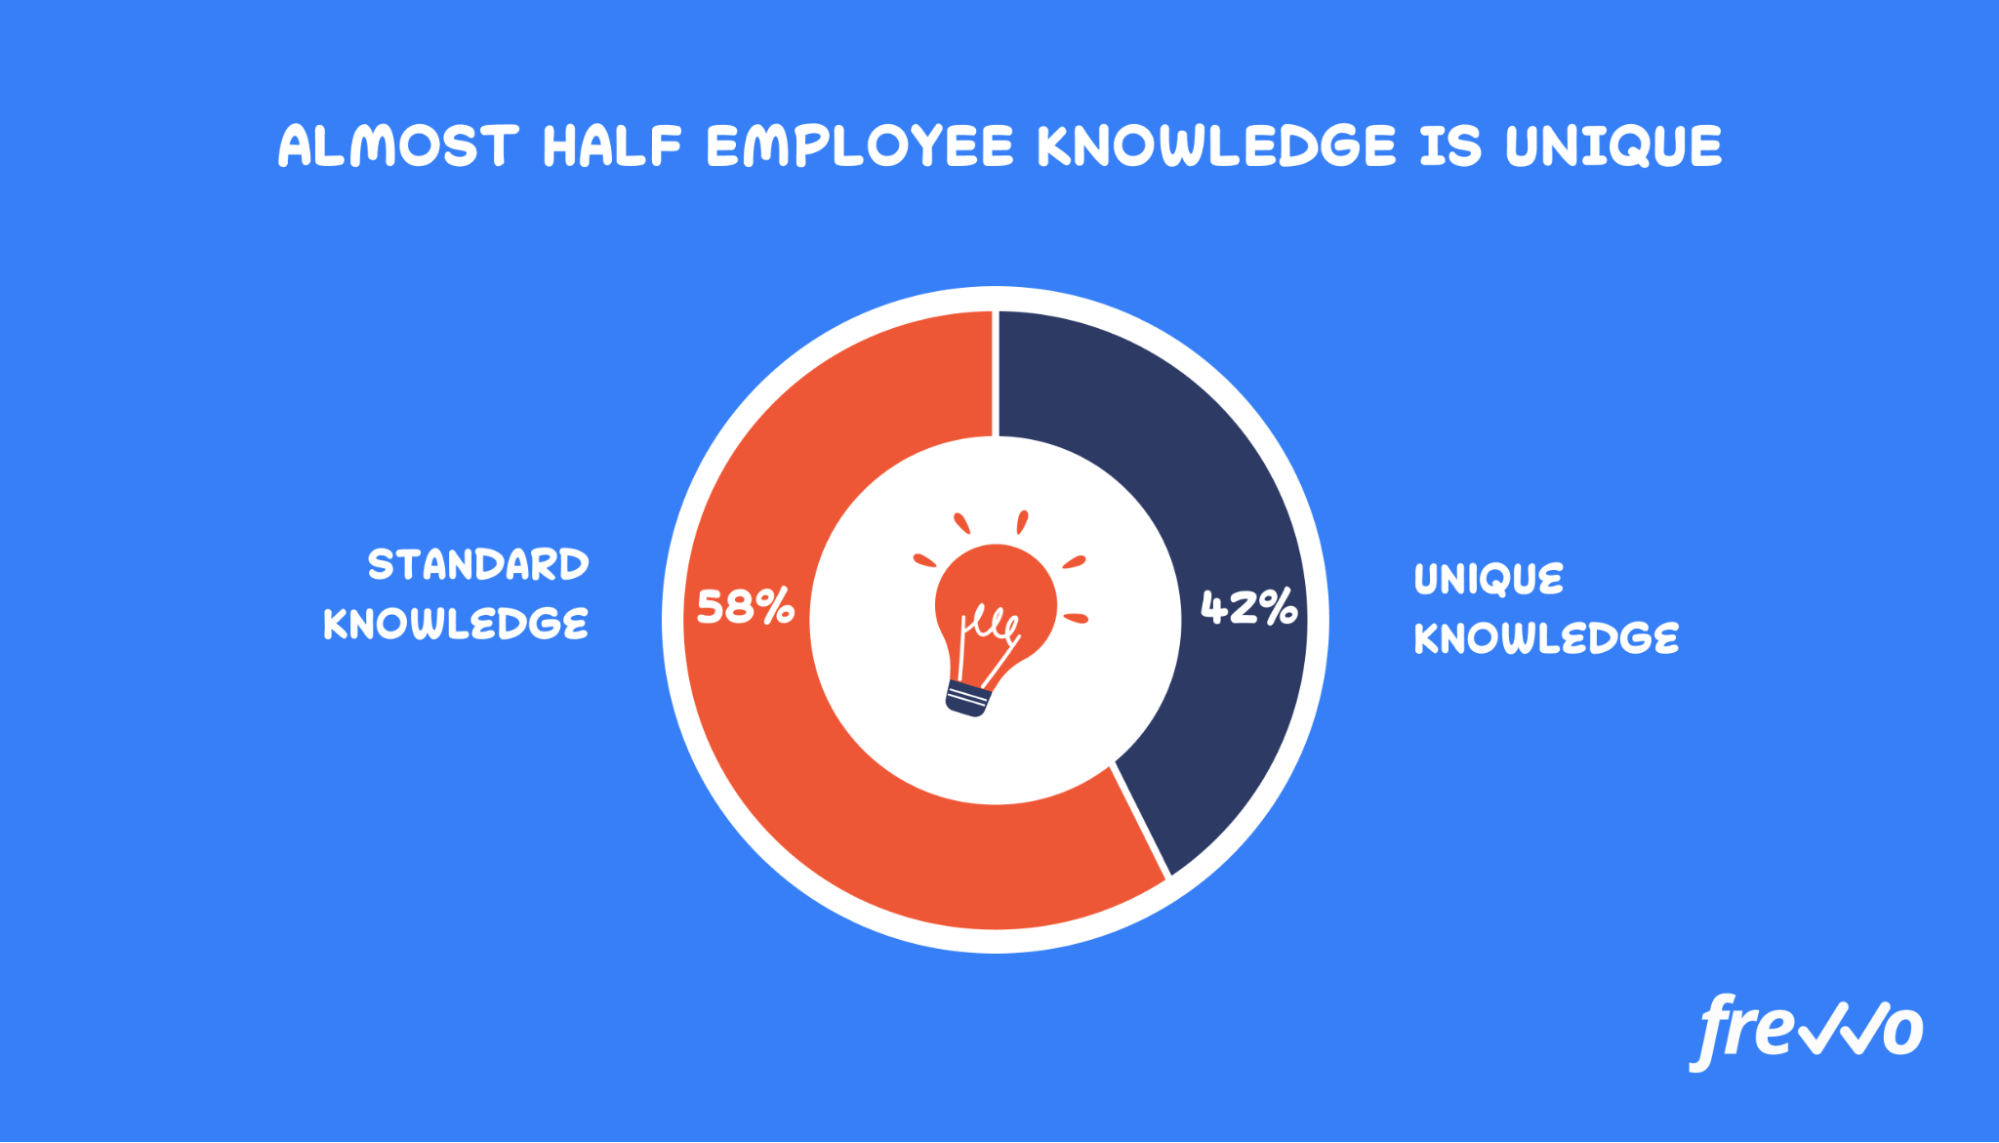 Almost half of employee knowledge is unique